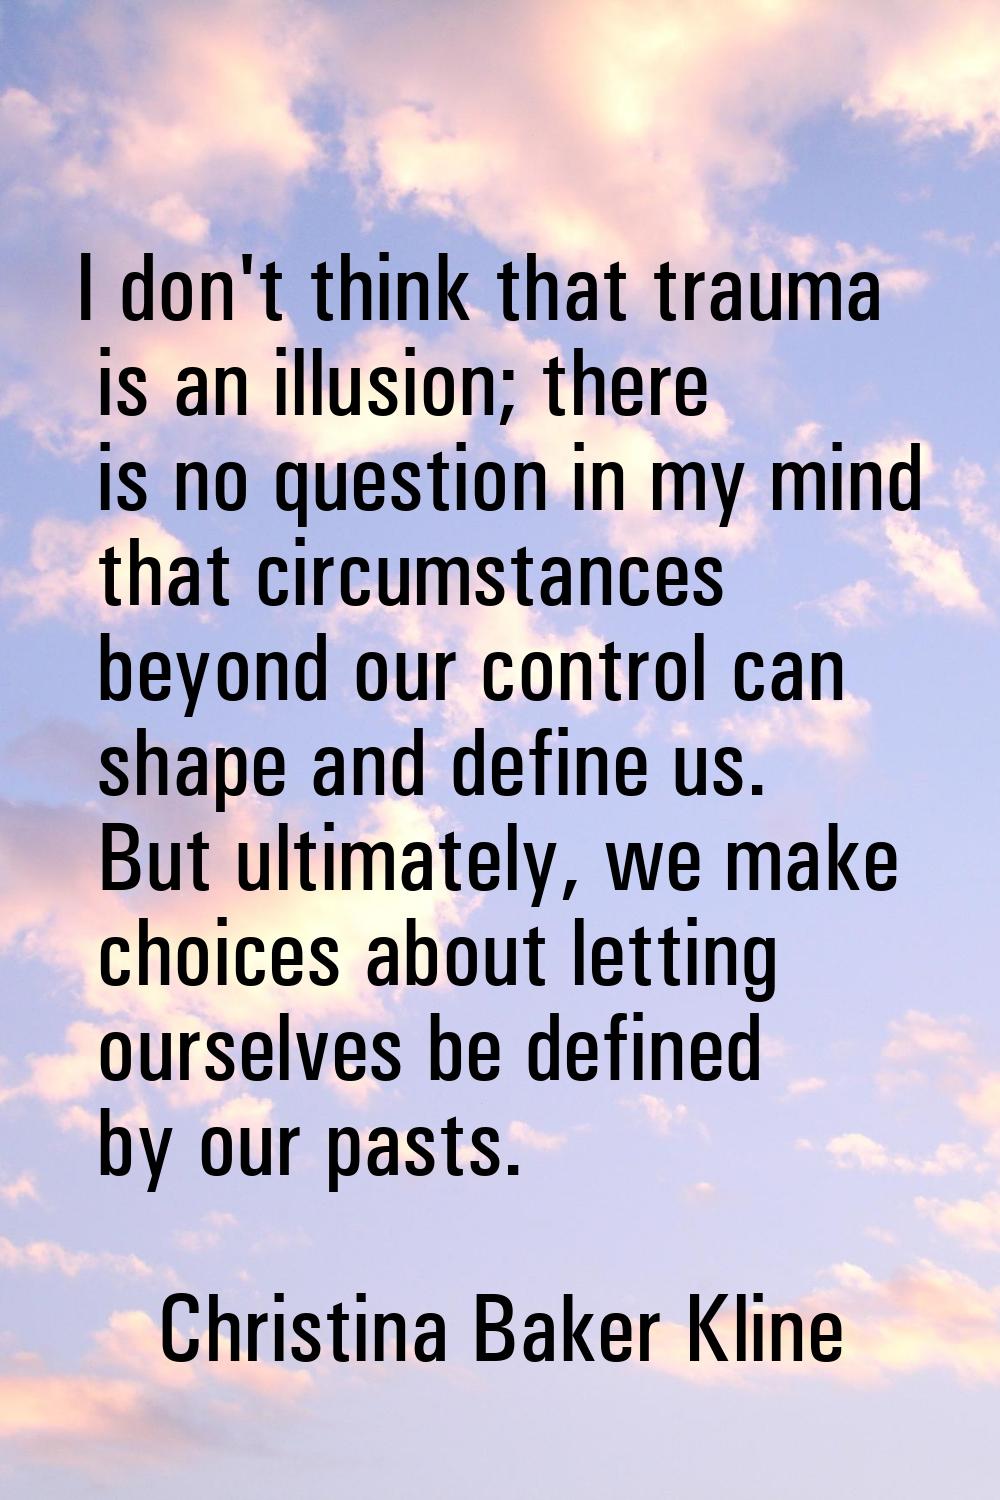 I don't think that trauma is an illusion; there is no question in my mind that circumstances beyond